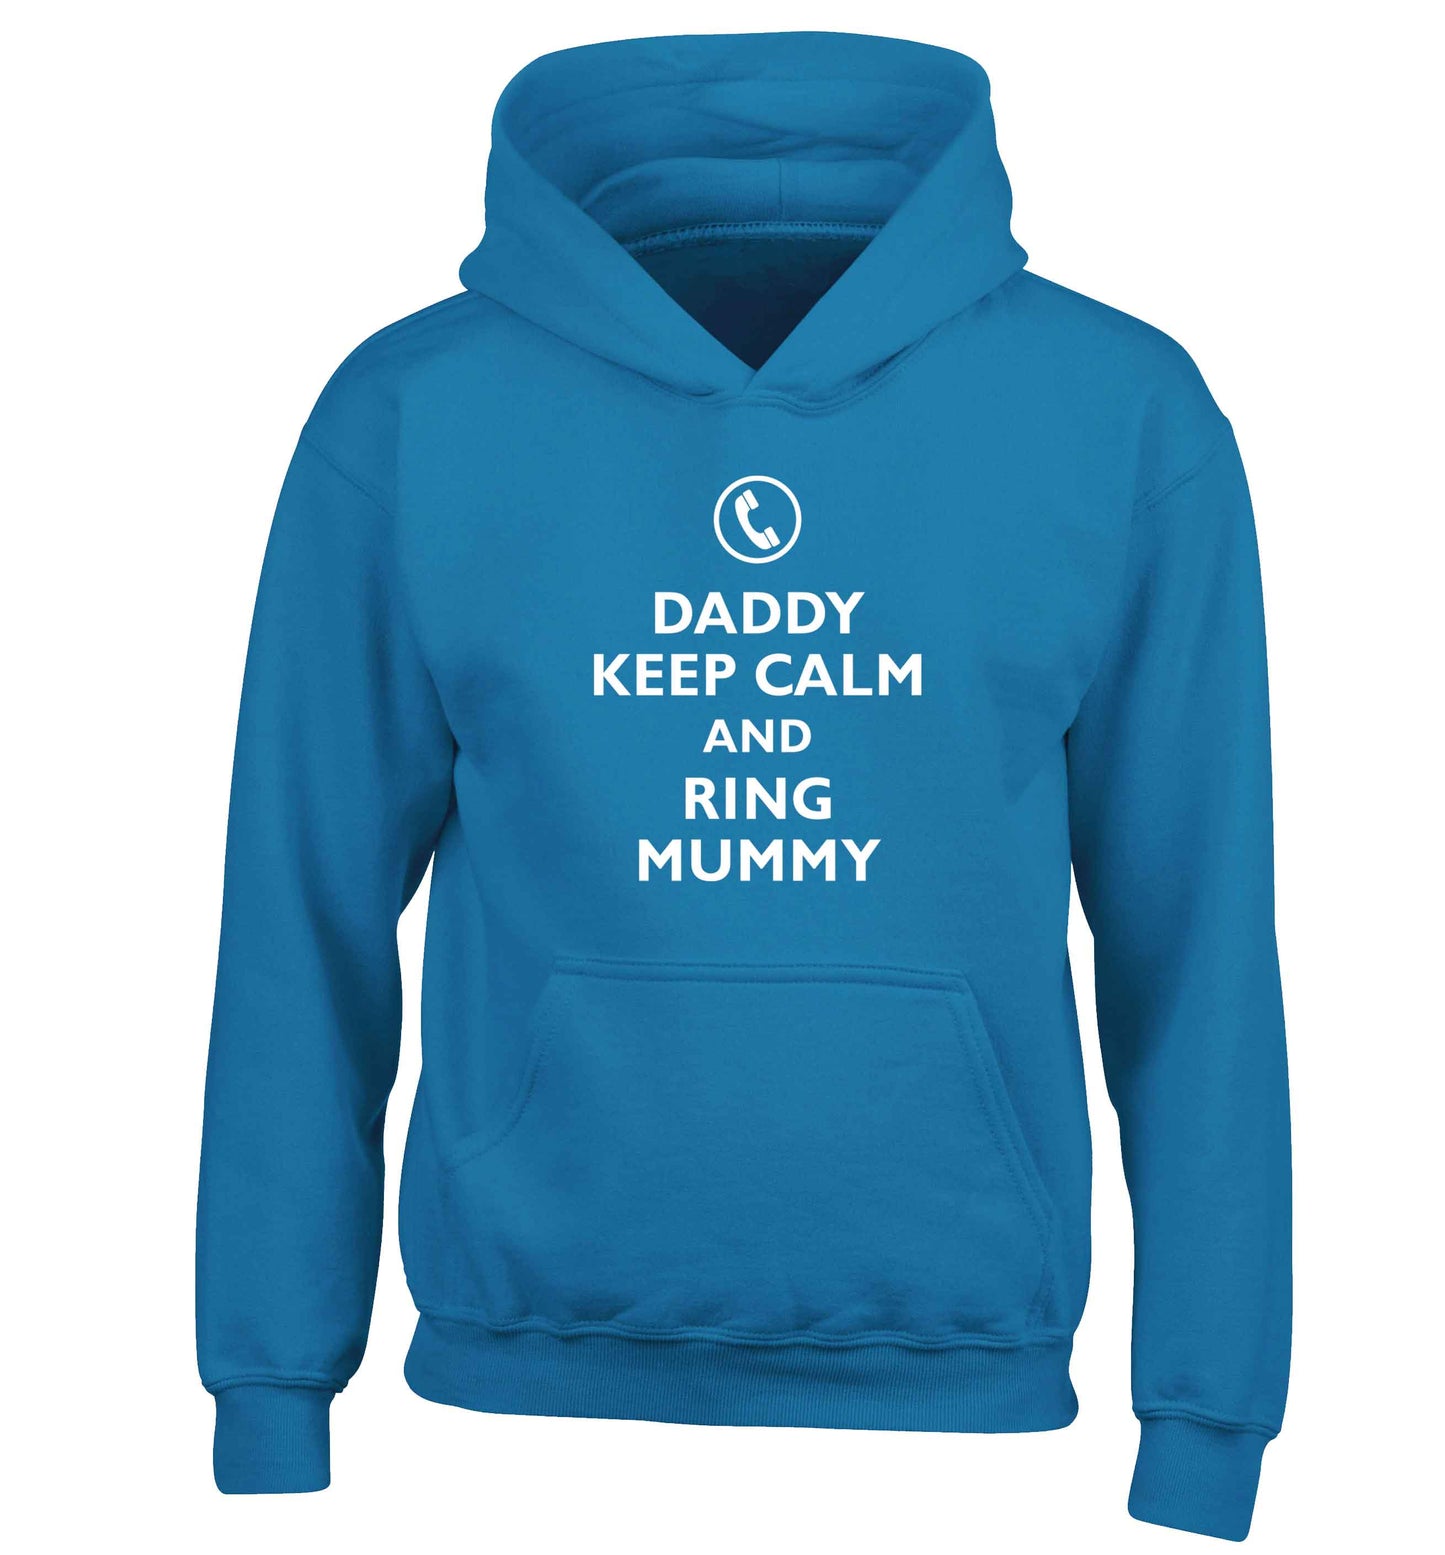 Daddy keep calm and ring mummy children's blue hoodie 12-13 Years